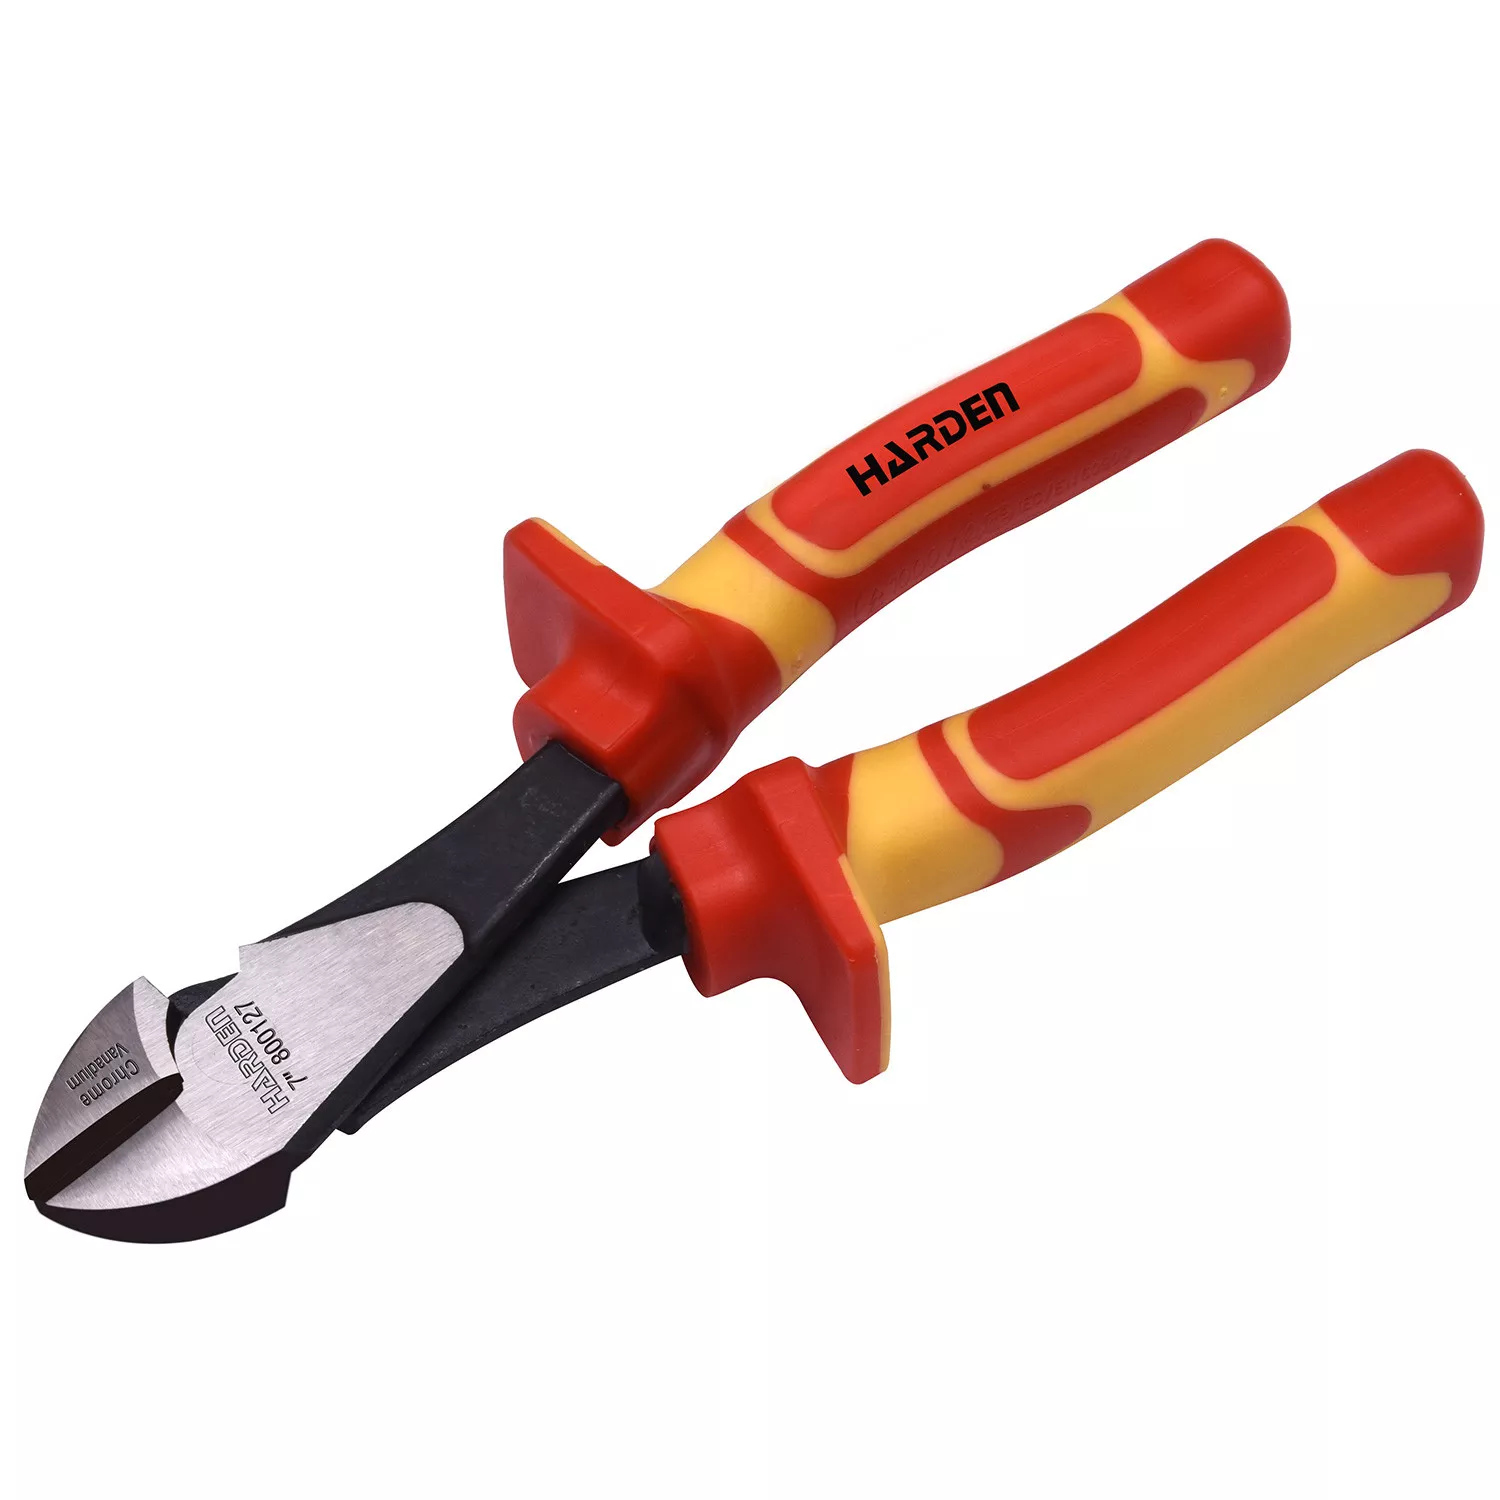 800127- Harden 7” Insulated Diagonal Nose Pliers